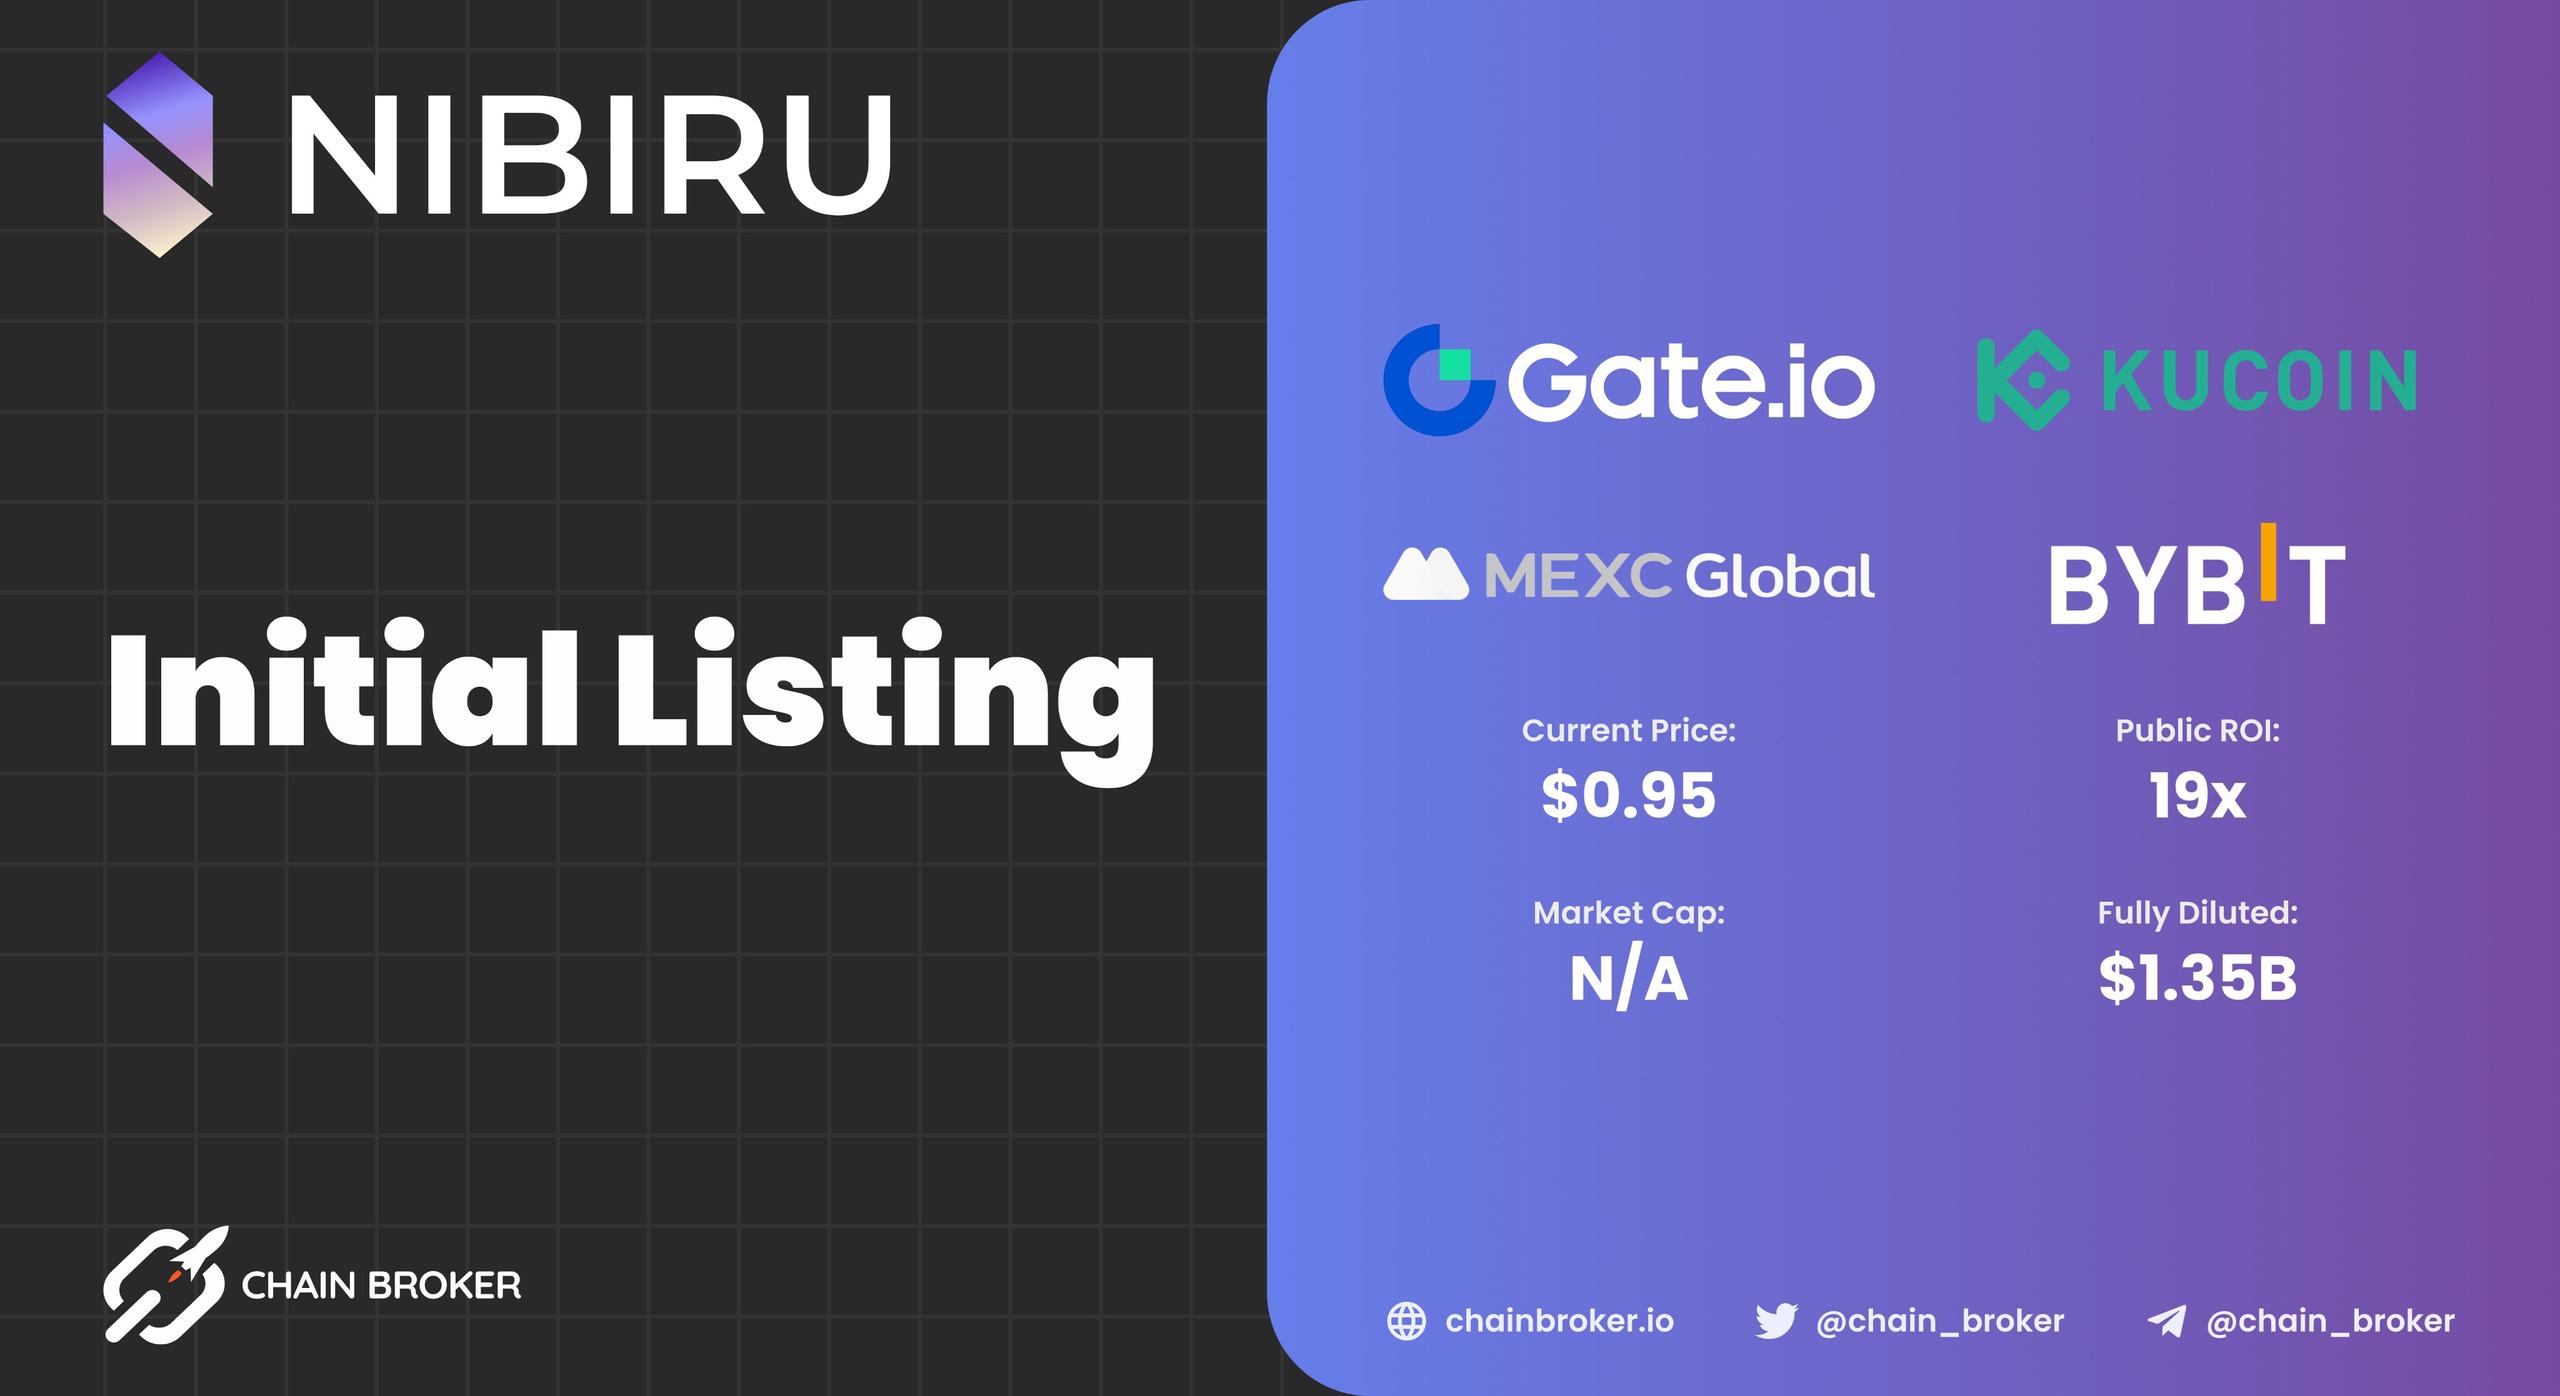 Nibiru Chain has been Listed!